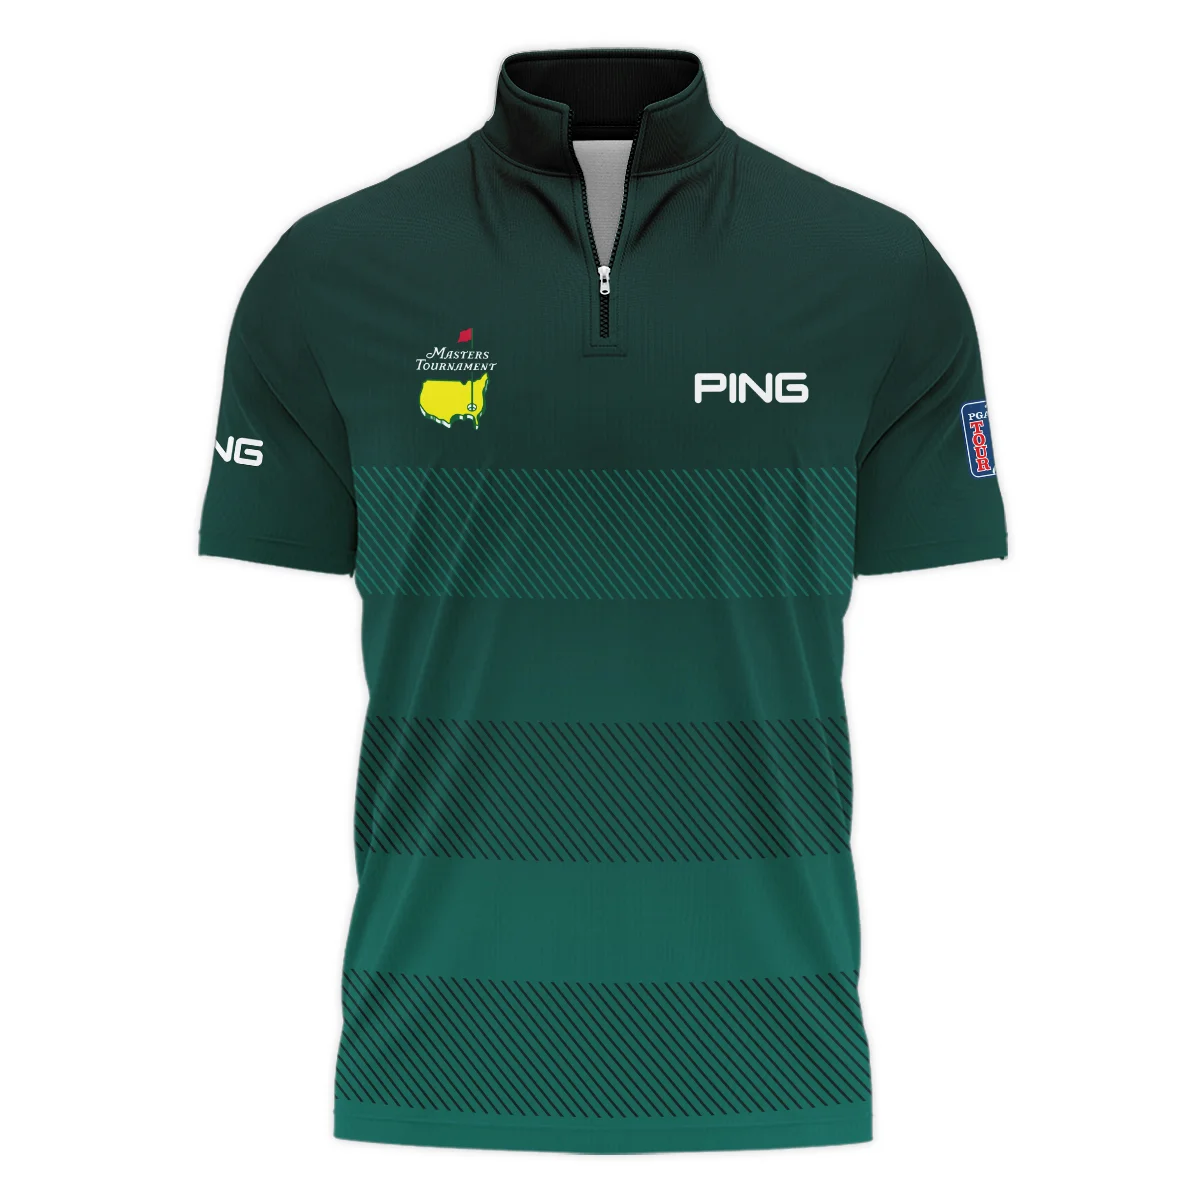 Ping Masters Tournament Dark Green Gradient Stripes Pattern Golf Sport Style Classic, Short Sleeve Polo Shirts Quarter-Zip Casual Slim Fit Mock Neck Basic